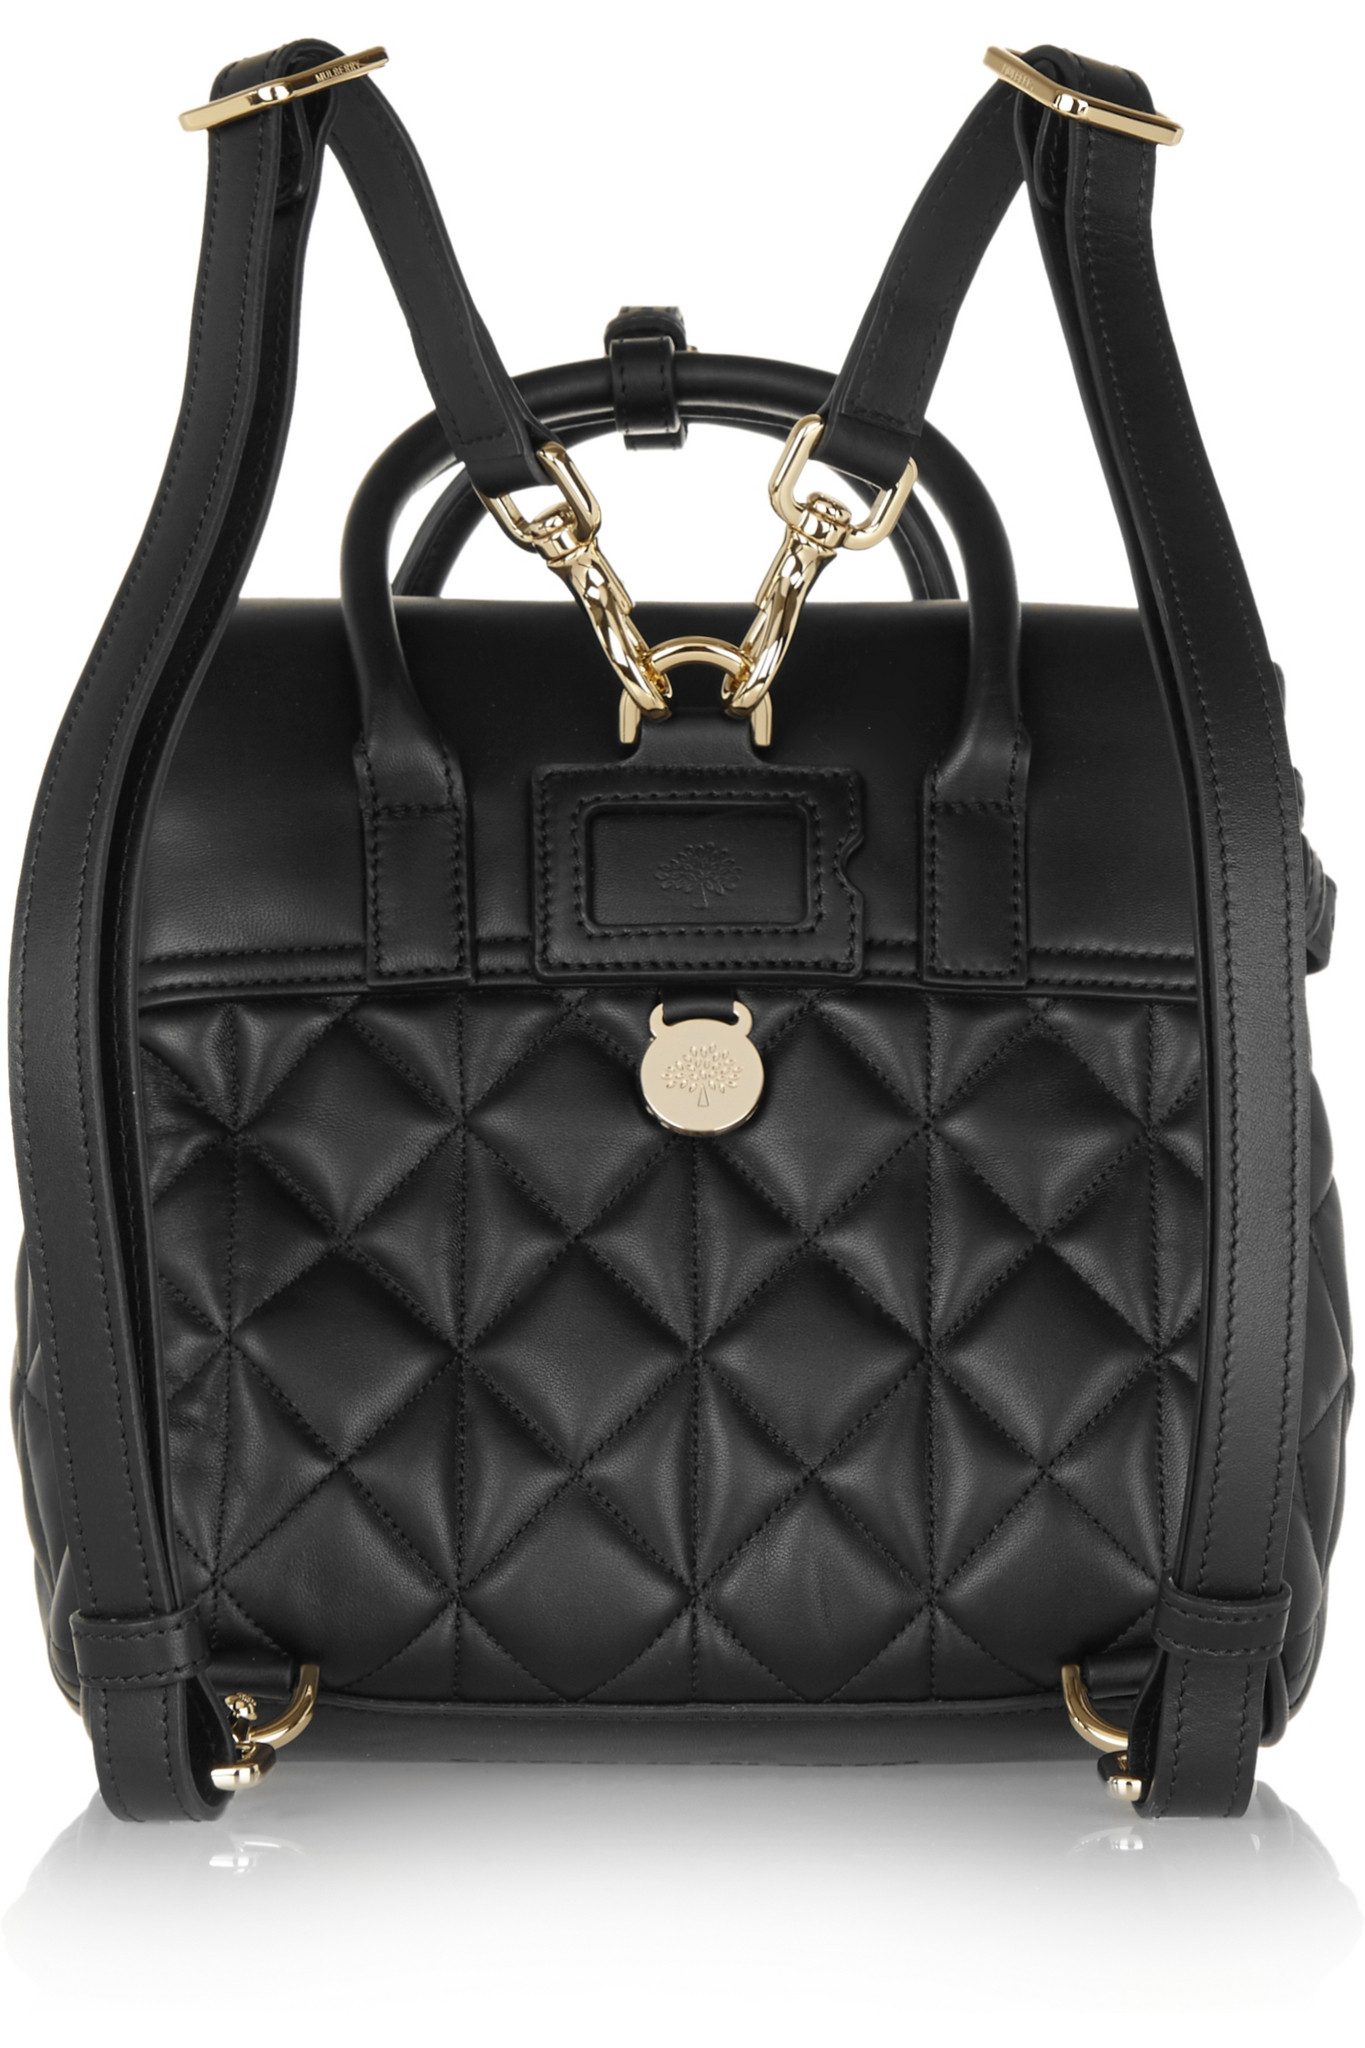 Mulberry + Cara Delevigne Mini Quilted Leather Backpack in Black - Lyst